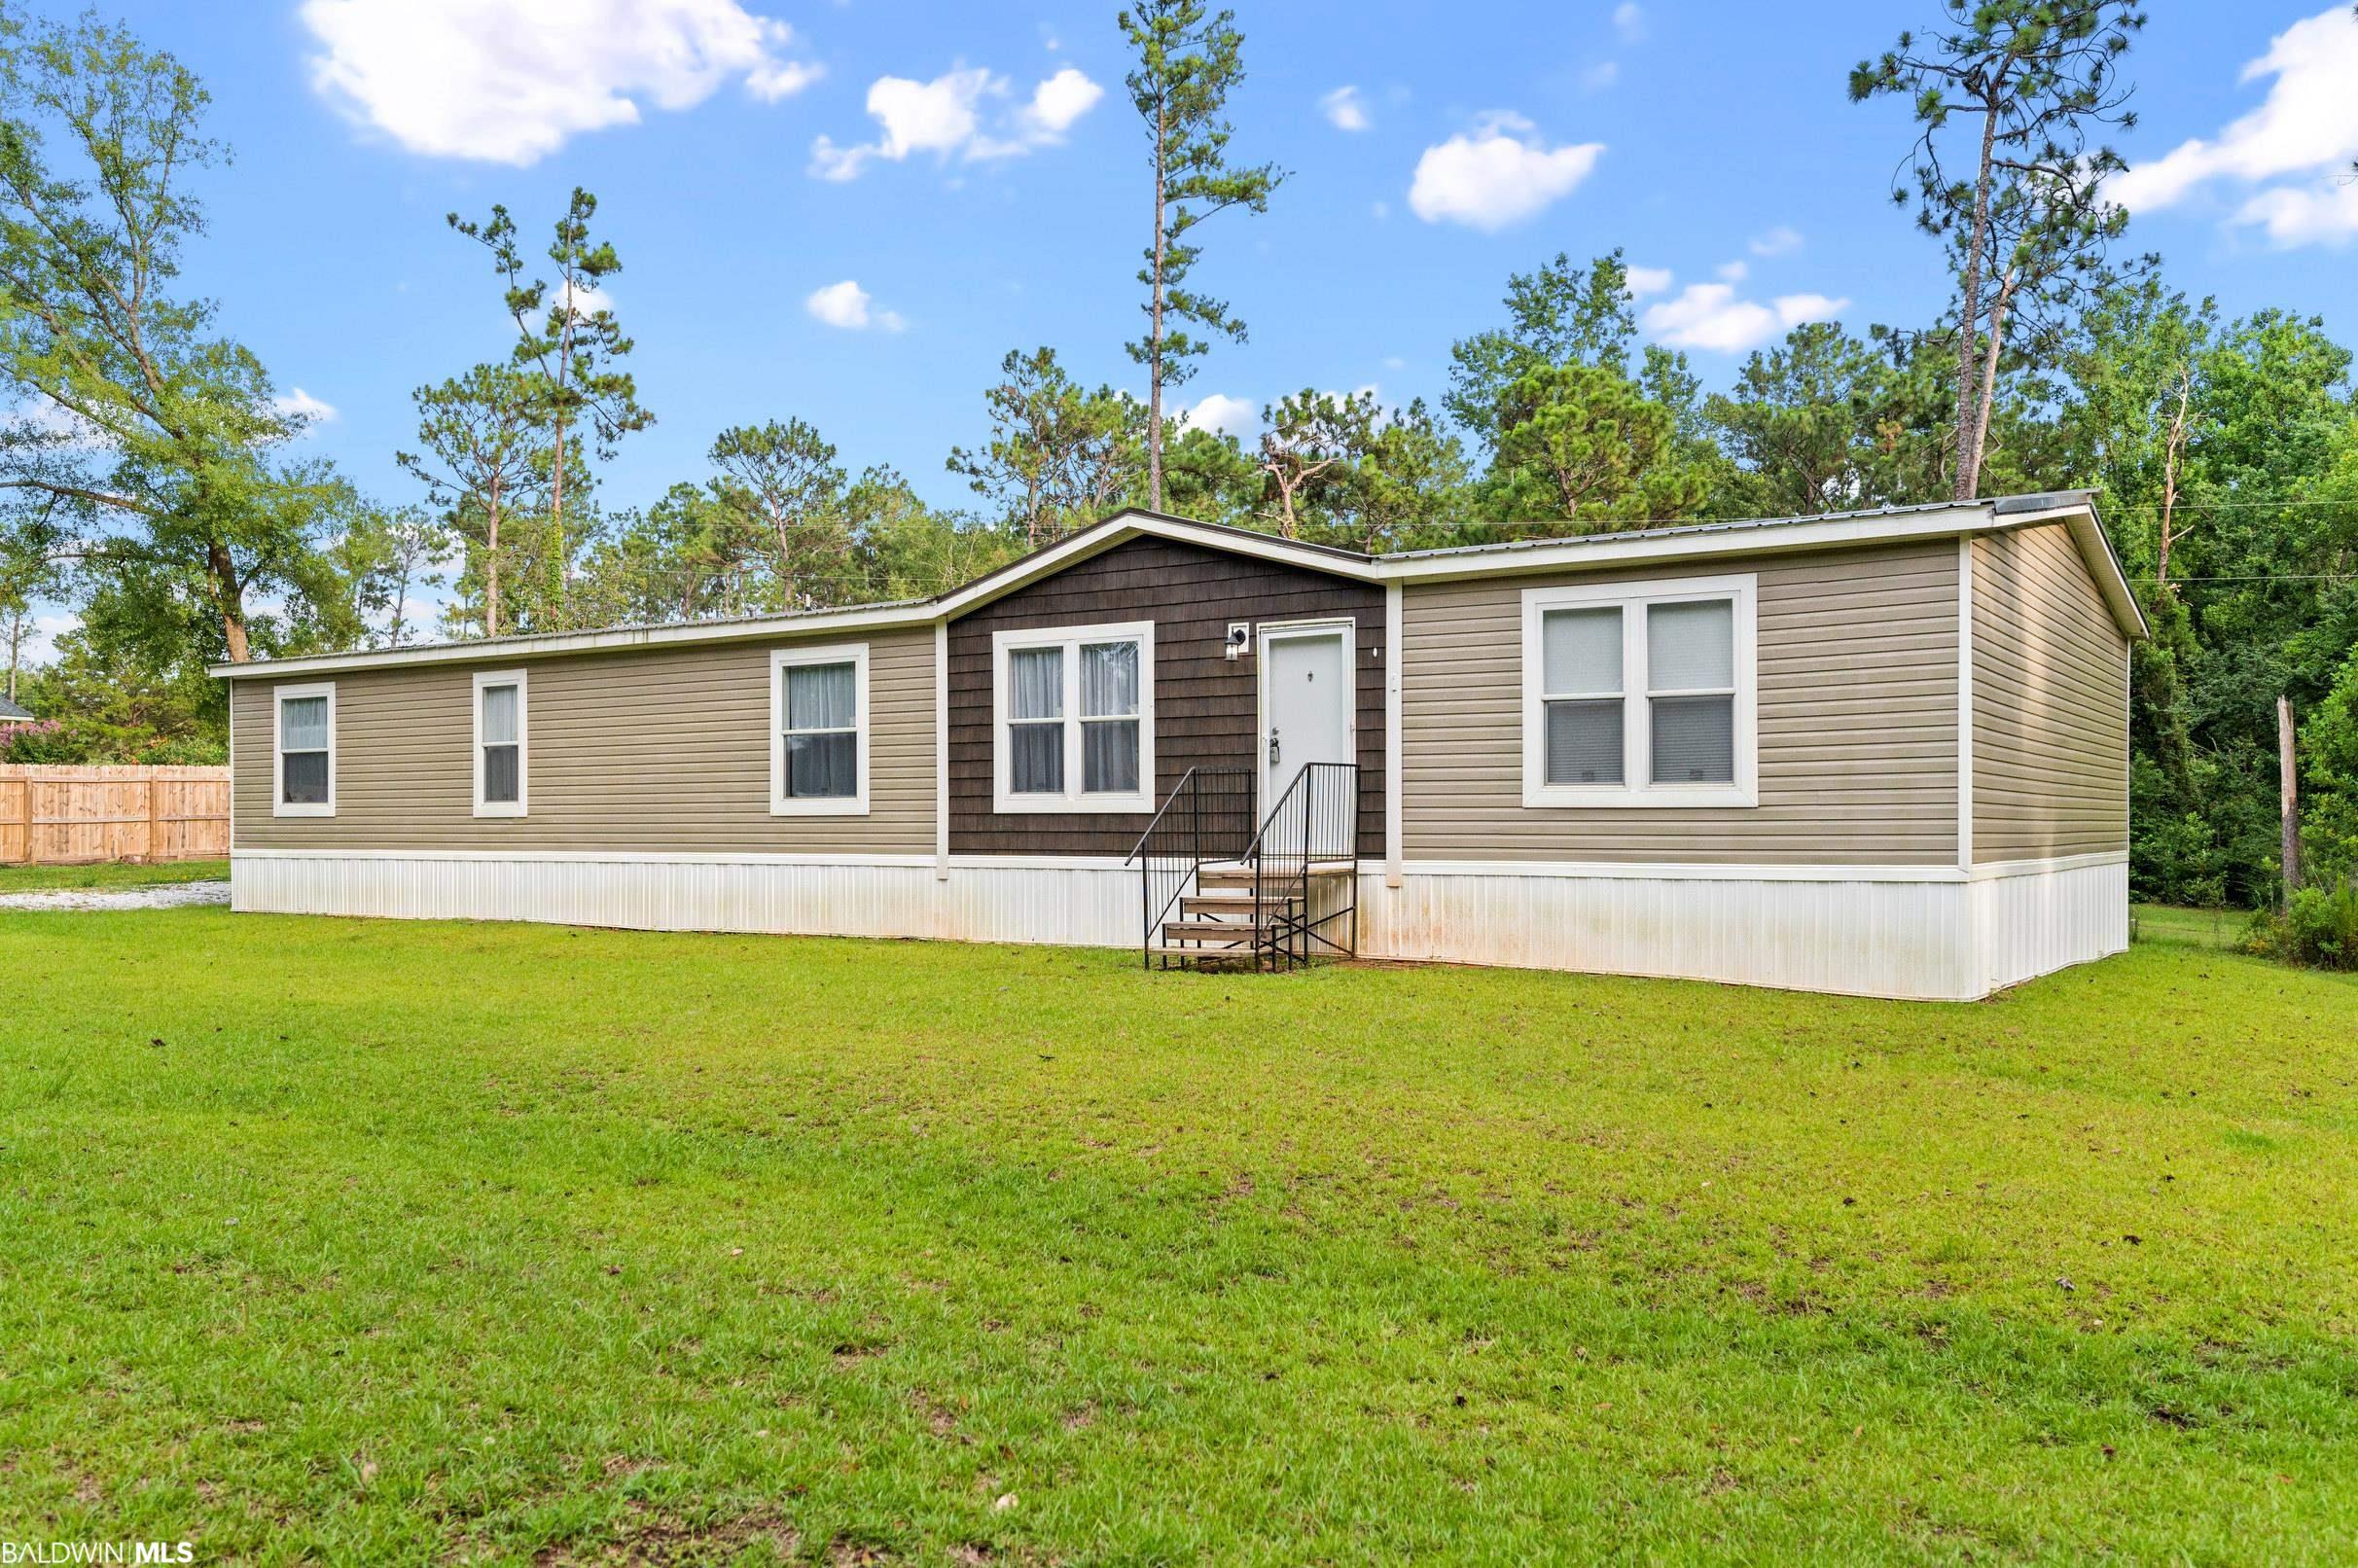 Lowest price move in ready home in Fairhope on an incredible lot in Fairhope, Alabama! On over an Acre with a state-of-the-art 2022 Hamilton VERMONT MODEL mobile home.  The home has 4BRs and 3baths and has barely been lived in.  It is on 1.3 acres in East Fairhope.  Fairhope schools with country living.   All rooms are spaciously sized.  Great floorplan with living room and separate den.  Large cook's kitchen with windows overlooking the beautiful lot.  Kitchen has lots of Cabinetry and storage.  Sep. Dining Area and Split bedroom plan.  Outdoor Storage/Workshop building has AC, plumbing and a commode conveys.  Unzoned, Deeded land on a private lane.  This is a can't miss.  Seller has relocated. Ask listing agent for detailed lender list for great programs on this home.